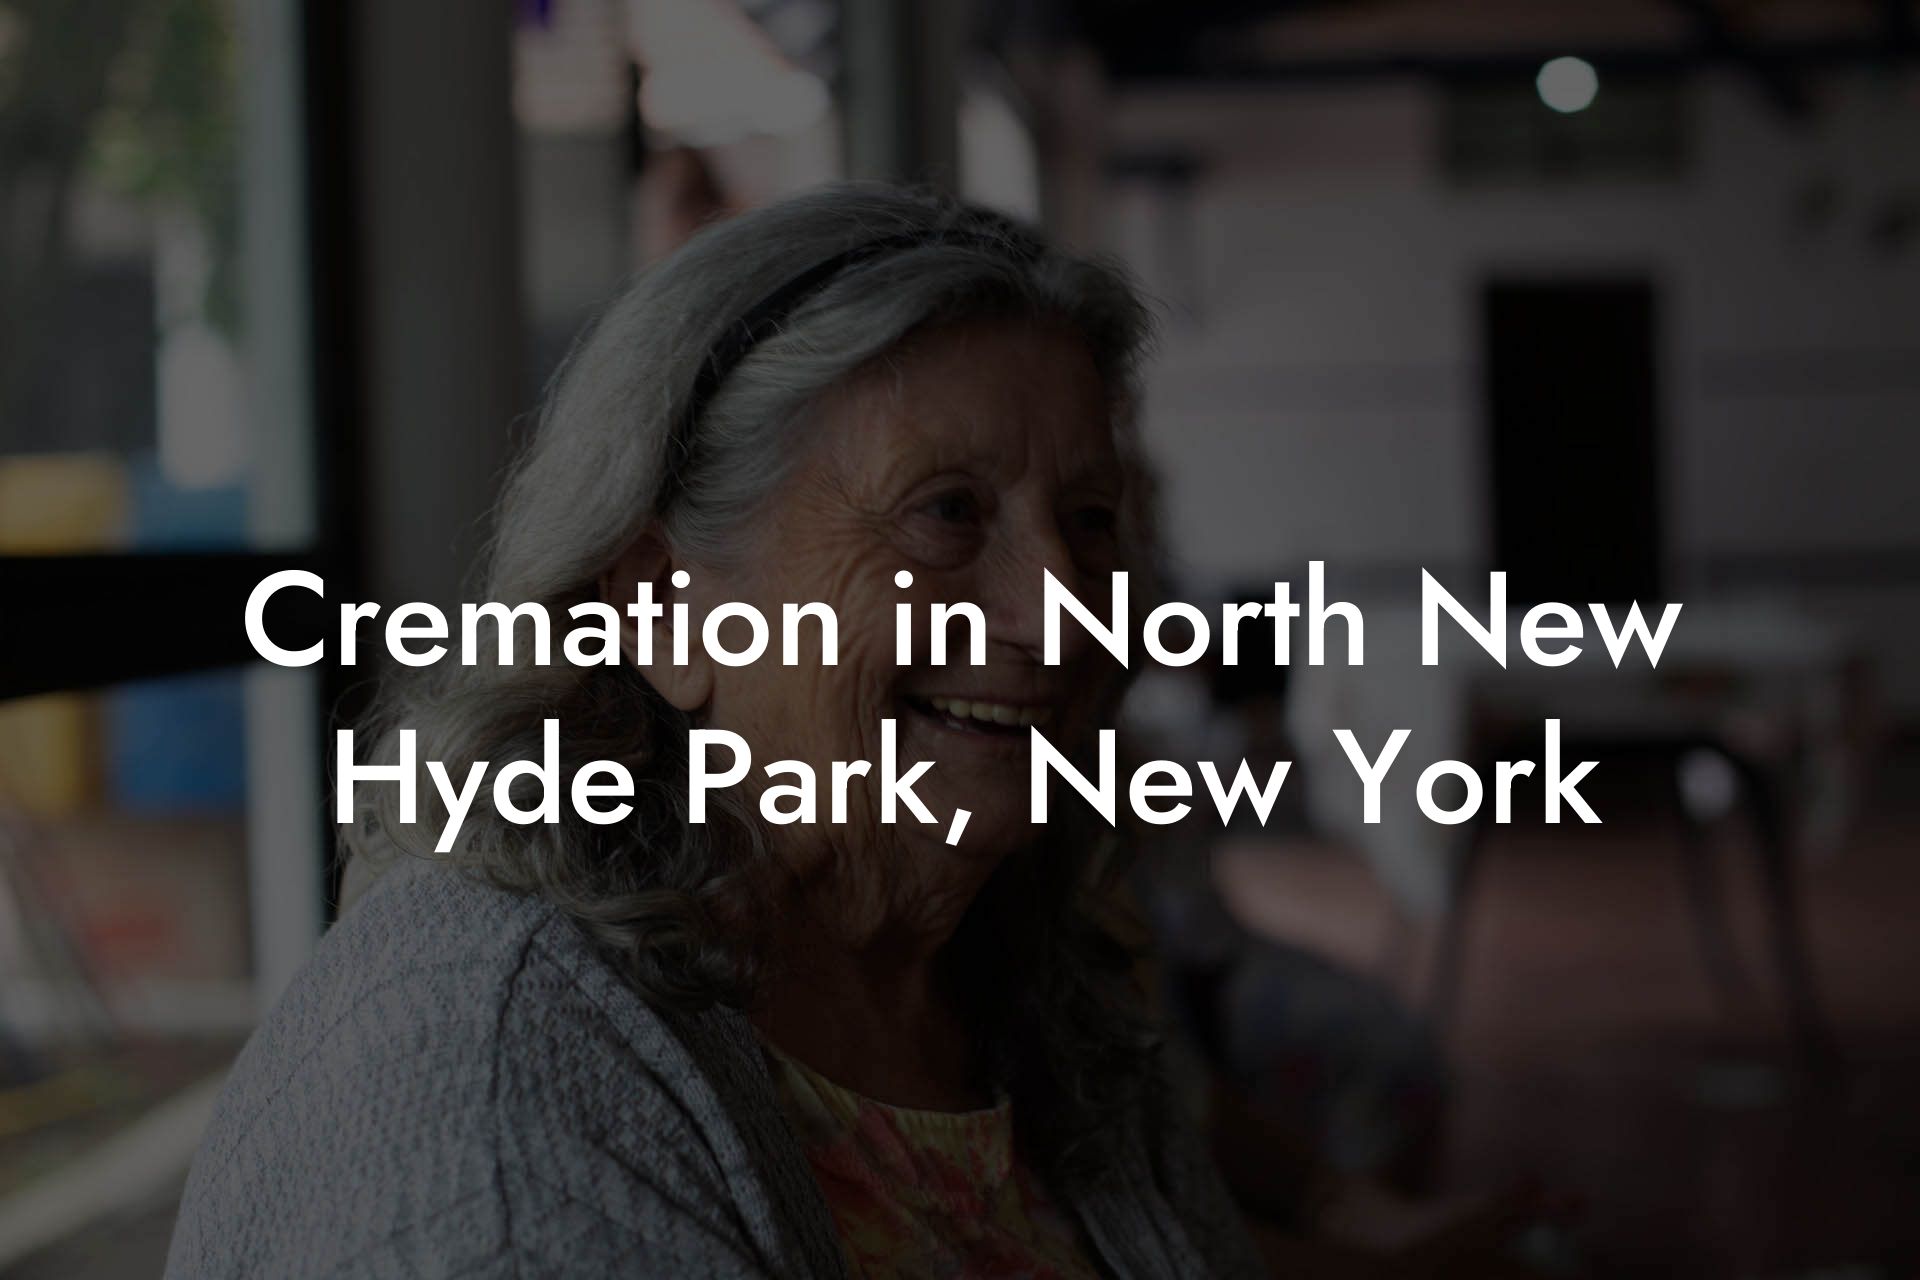 Cremation in North New Hyde Park, New York